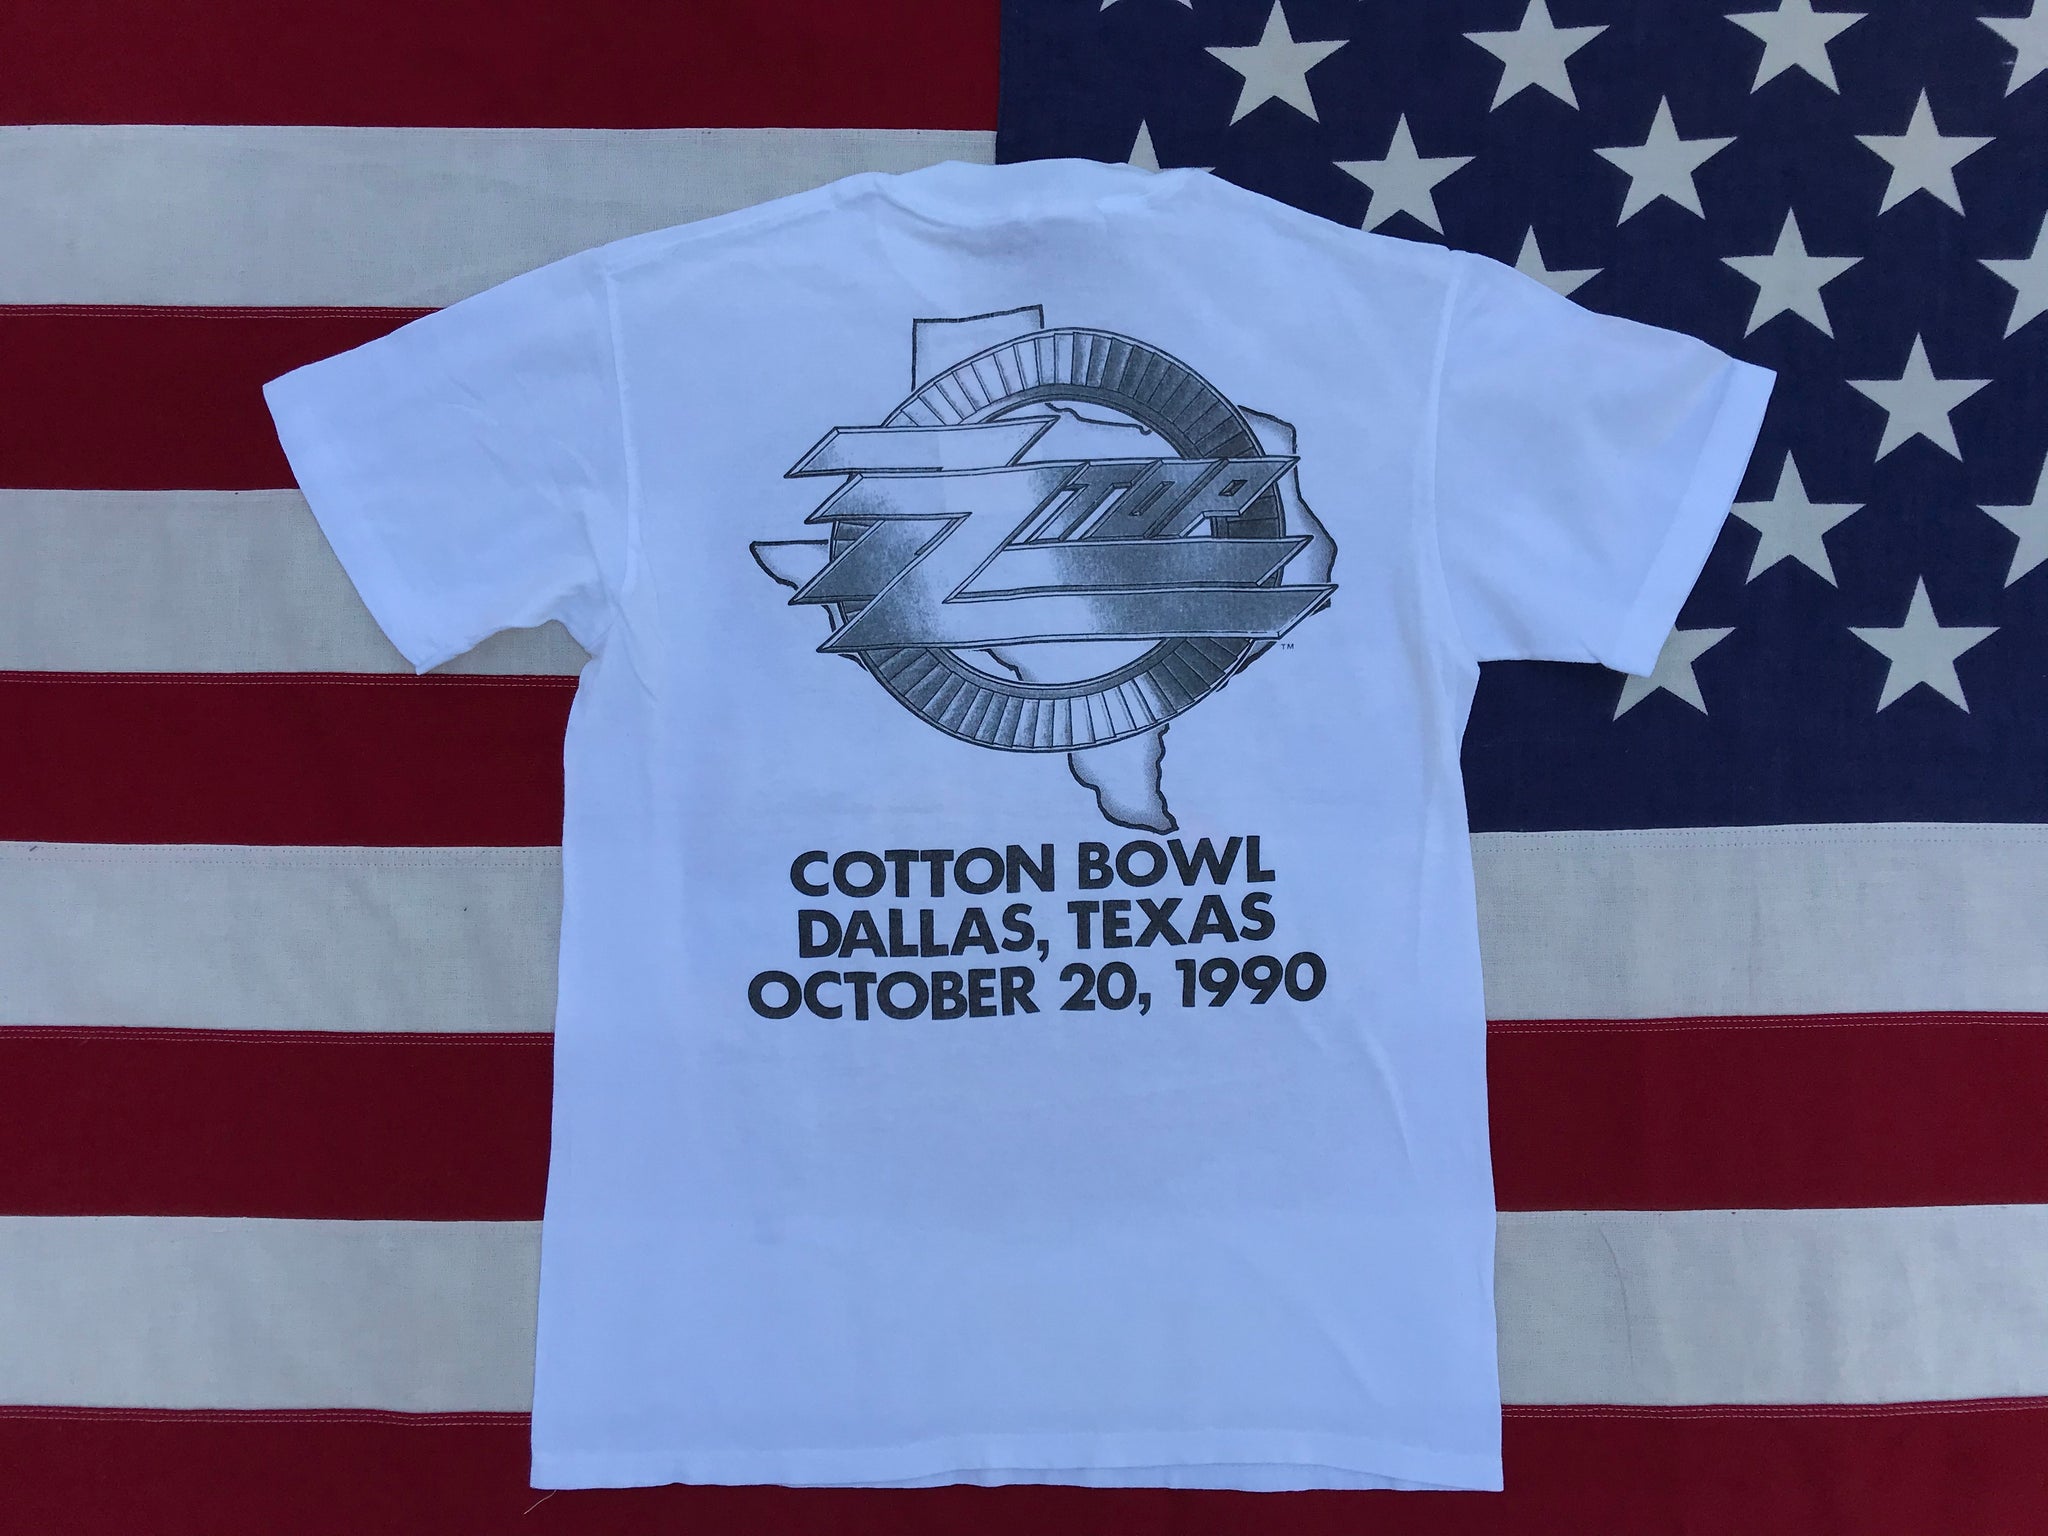 ZZTOP - Cotton Bowl Dallas, Texas 1990 Original Vintage Rock T-Shirt by Spring Ford Sportswear Made in USA